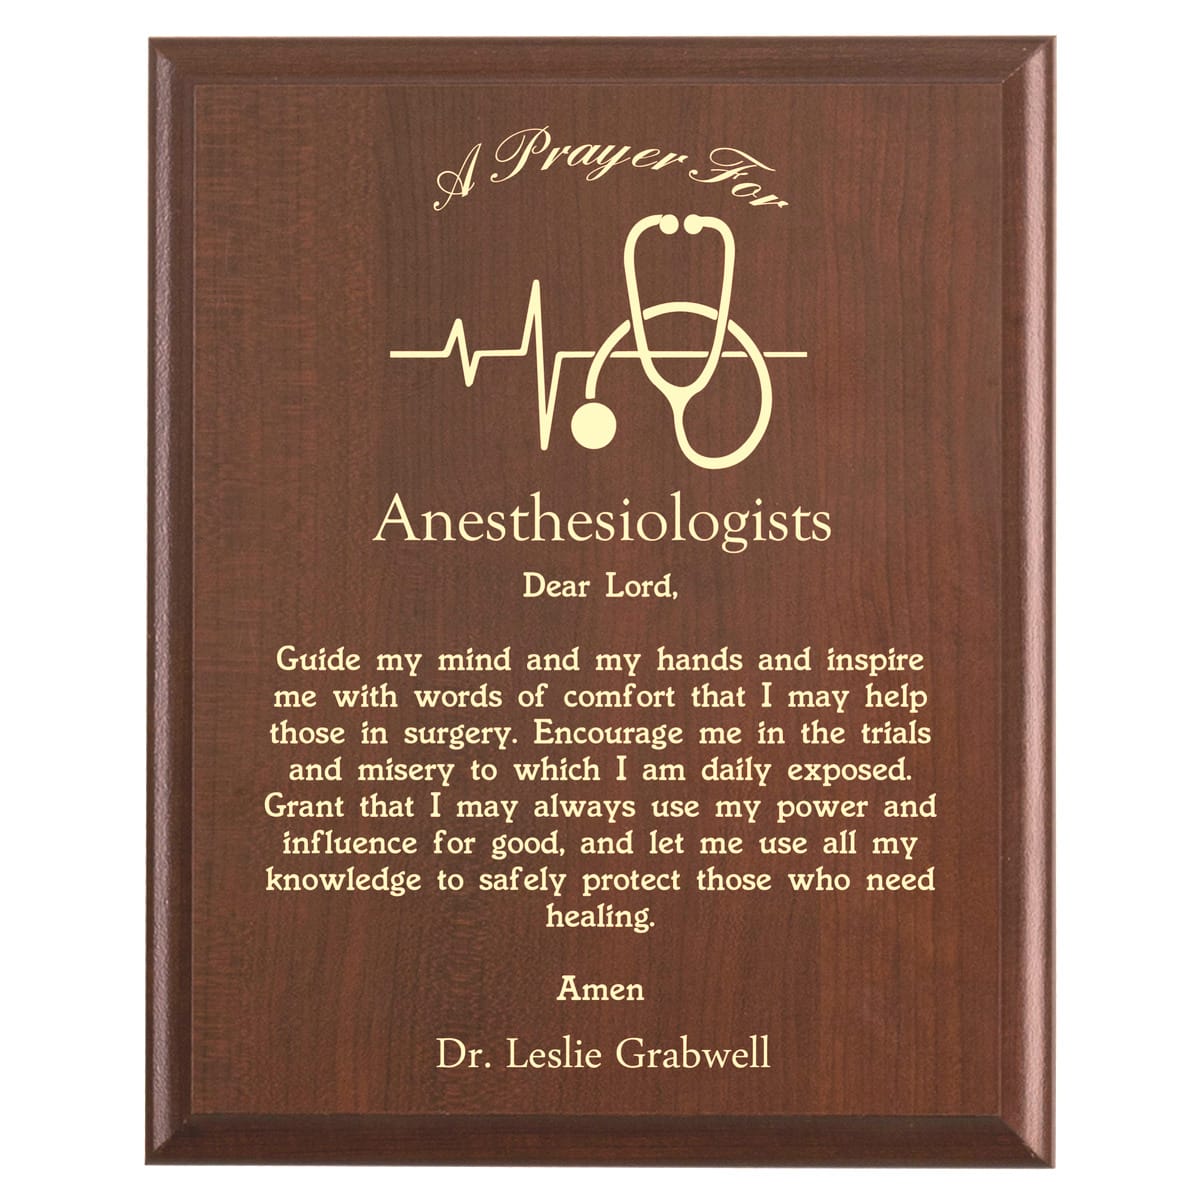 Plaque photo: Anesthesiologist Prayer Plaque design with free personalization. Wood style finish with customized text.